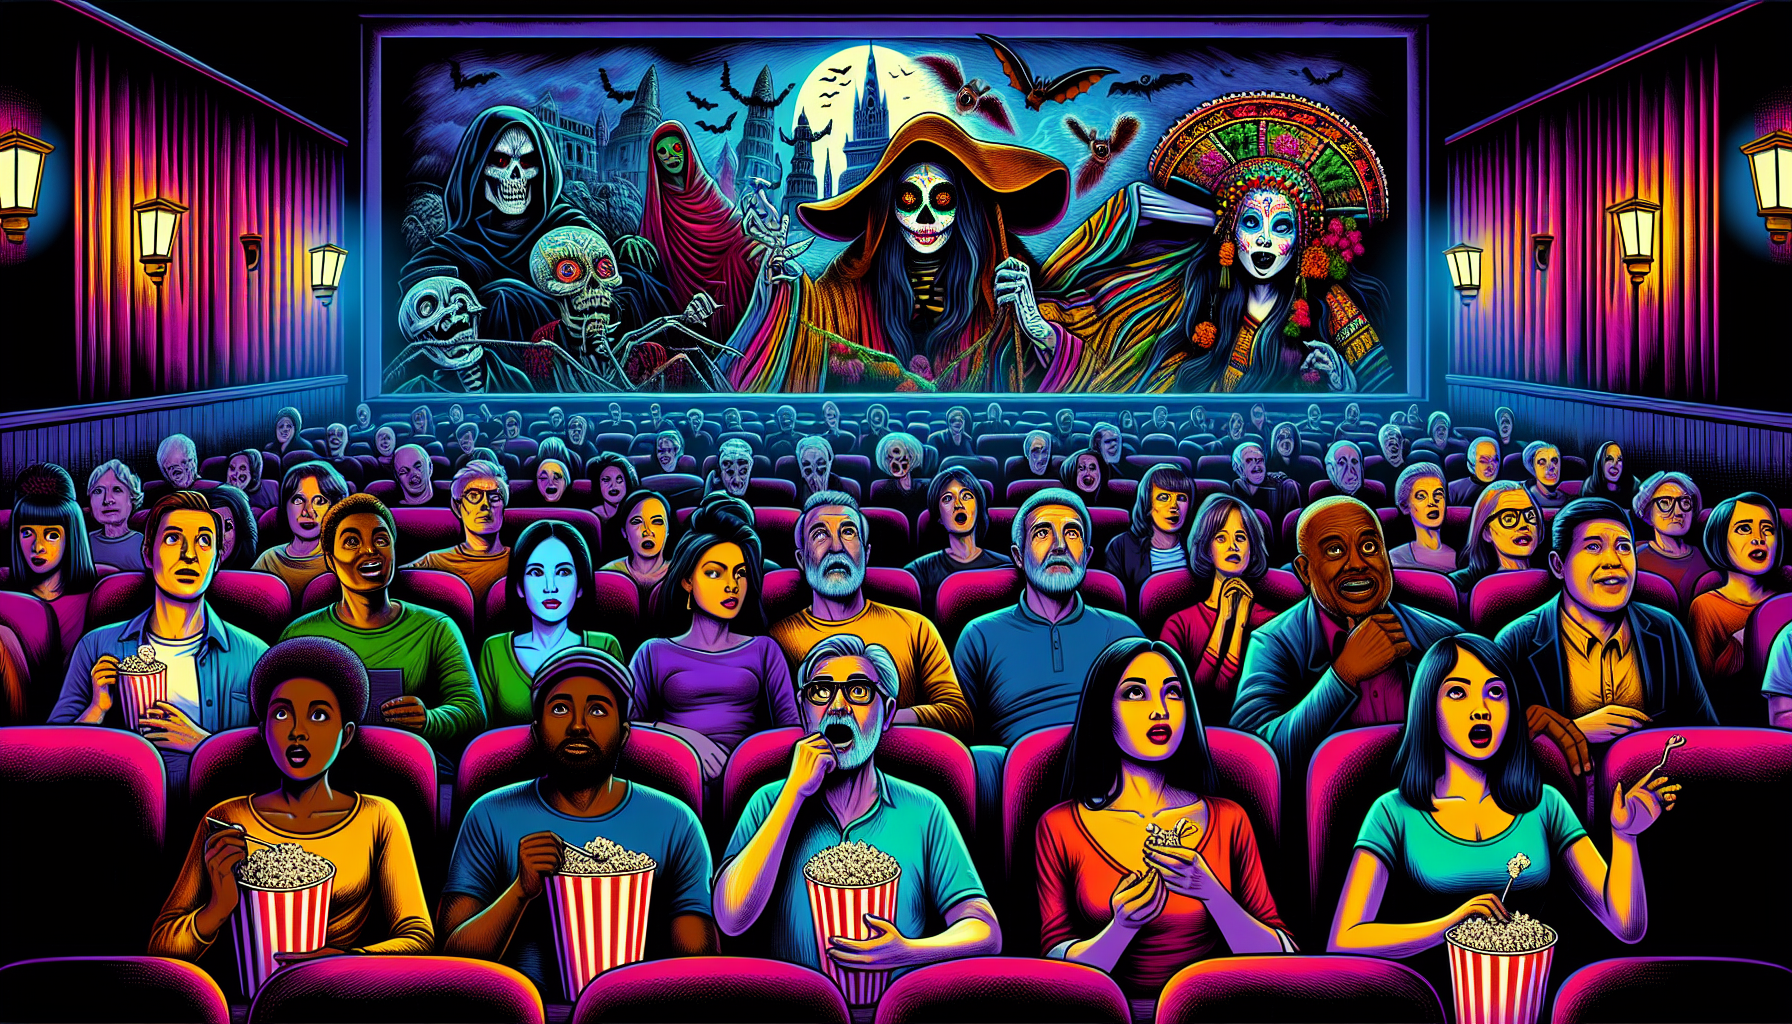 An artistic depiction of a diverse group of people from different cultural backgrounds sitting in a cozy, dimly-lit movie theater, each reacting differently to a horror scene on the big screen, which